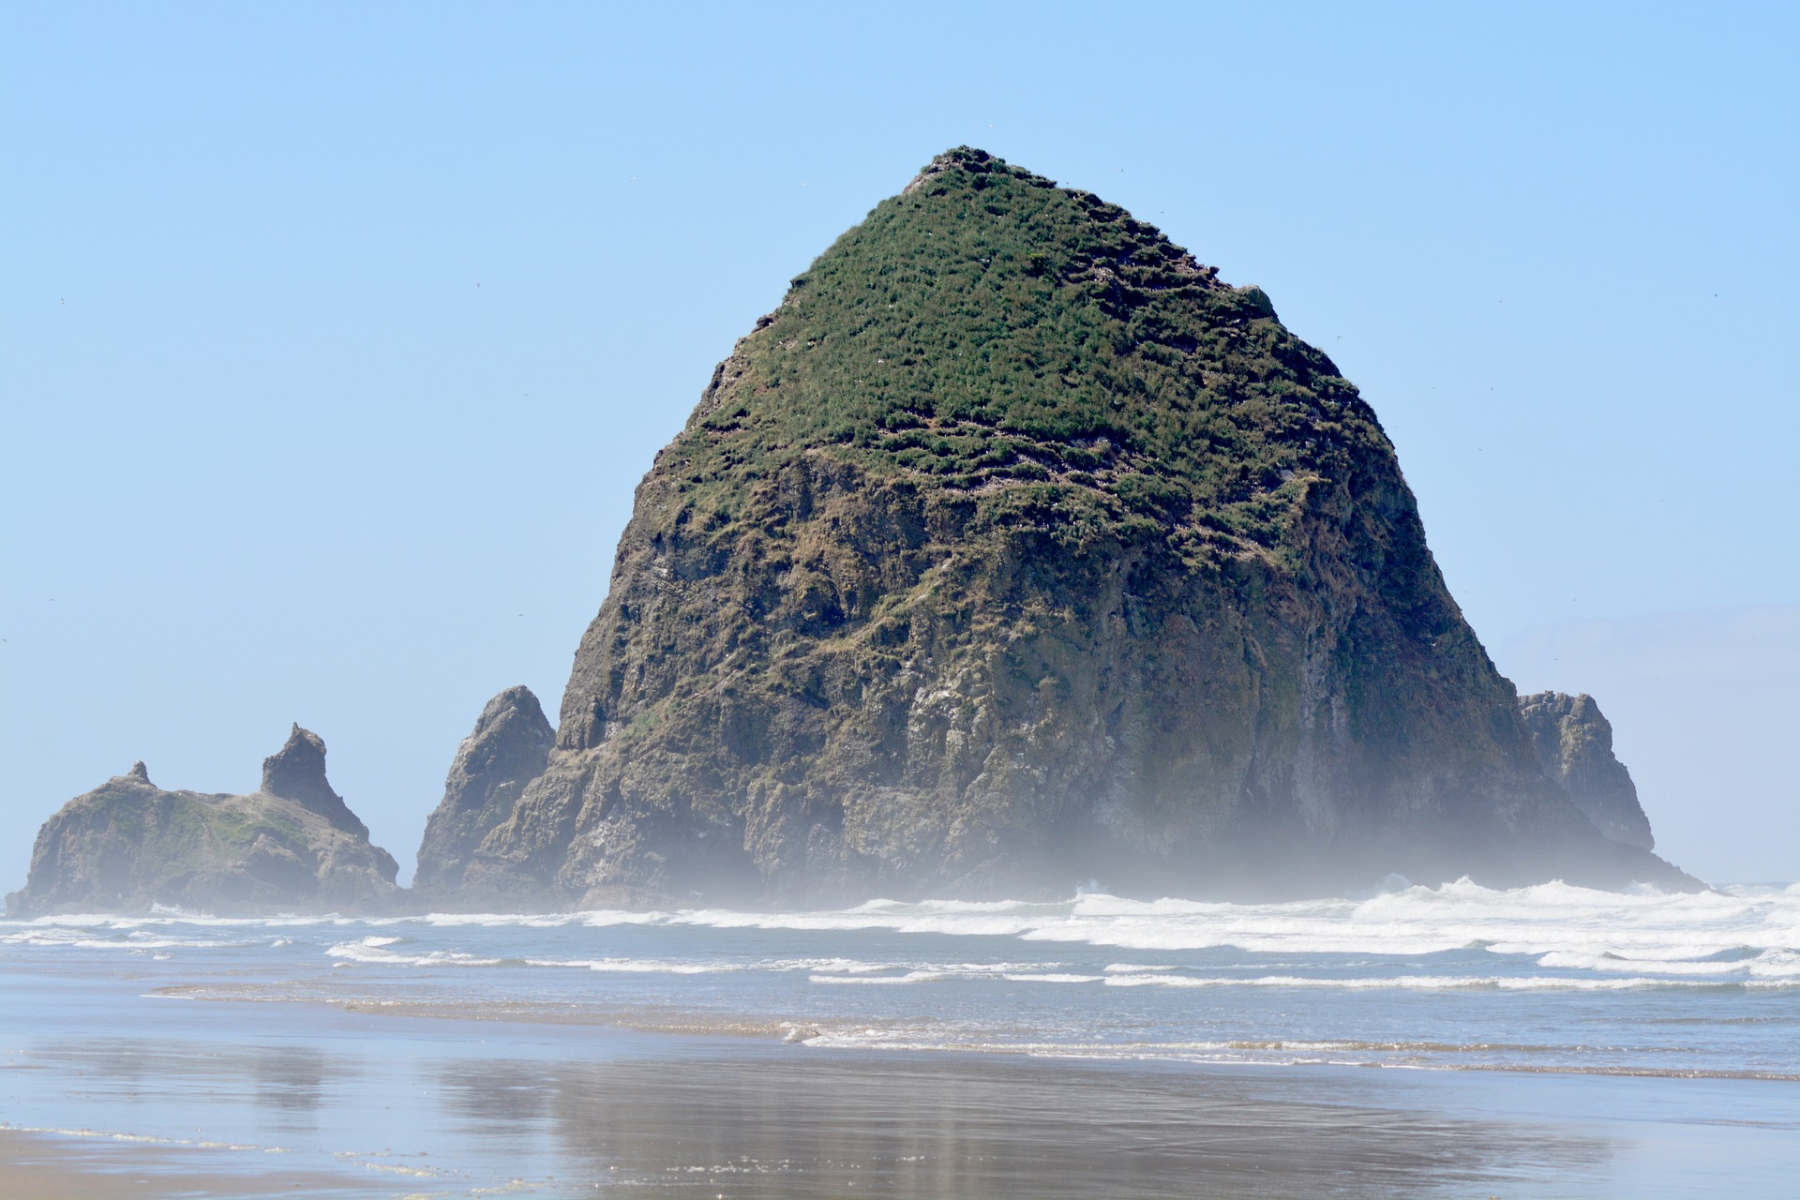 <p>California's Pacific Coastal Highway may get all the attention, but the <a href="https://www.globeguide.ca/oregon-coast-road-trip/" title="https://www.globeguide.ca/oregon-coast-road-trip/">Oregon Coast Highway 101</a> deserves equal kudos. The seven-hour coastal route snakes by or through redwood forests, wonderful beaches, including Cannon Beach (the charms of the seaside town celebrated in movies such as <em>The Goonies</em> and <em>Twilight</em>), small towns such as Seaside and Newport, state parks, and the Myrtle Tree Trail, a quarter-mile walk leading to what may be the world’s largest known eucalyptus tree, with a canopy that’s almost 70 feet across.</p>